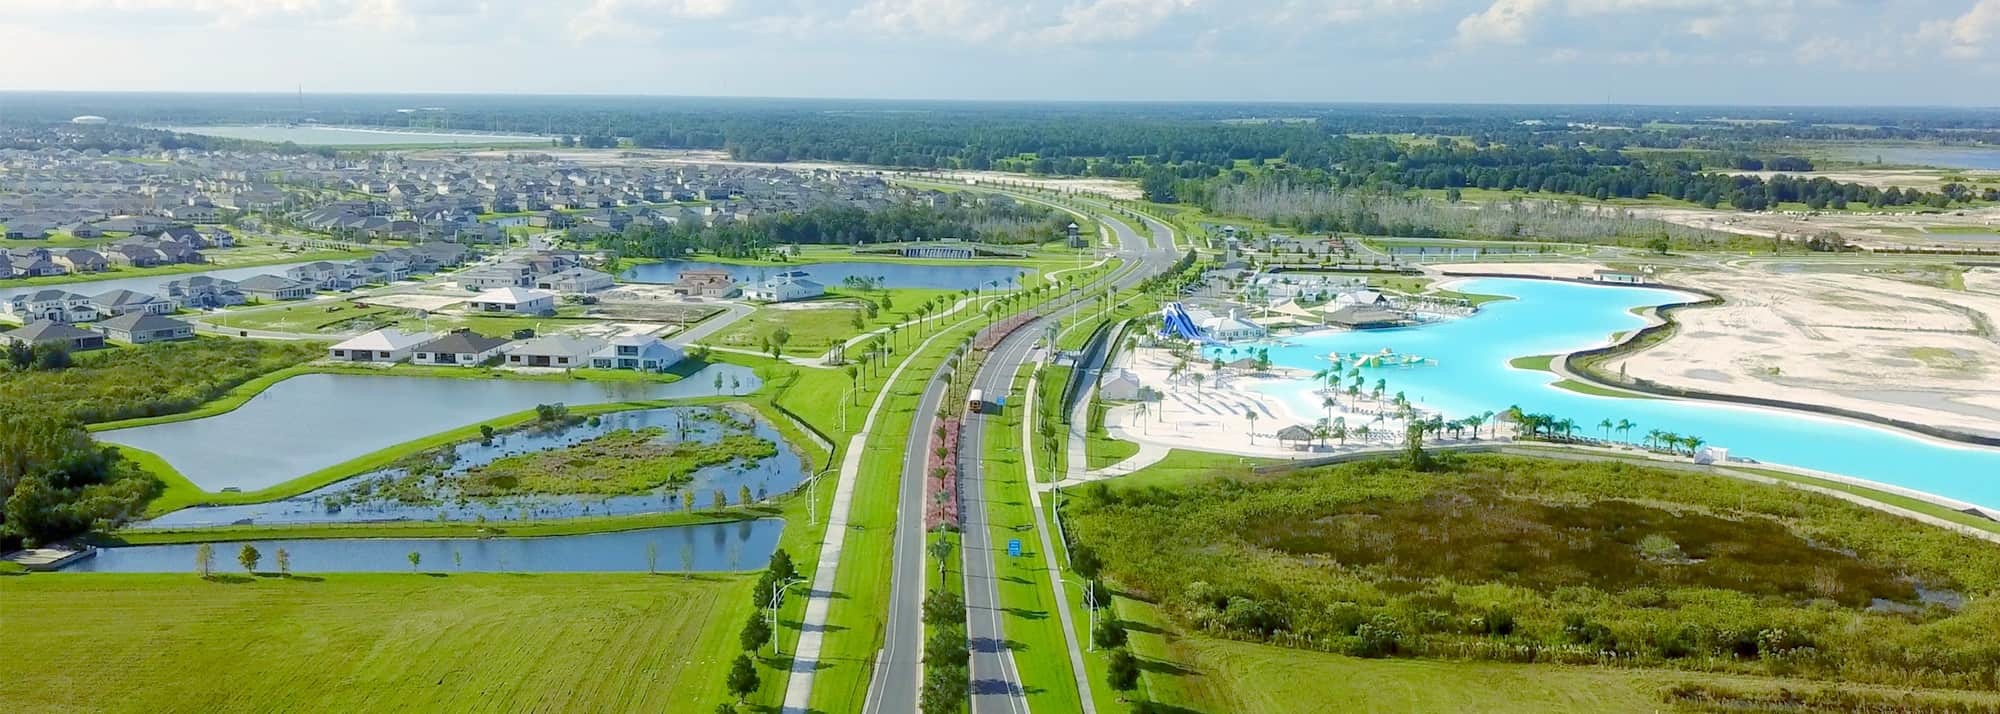 Courtesy. The Epperson master-planned community in Wesley Chapel.